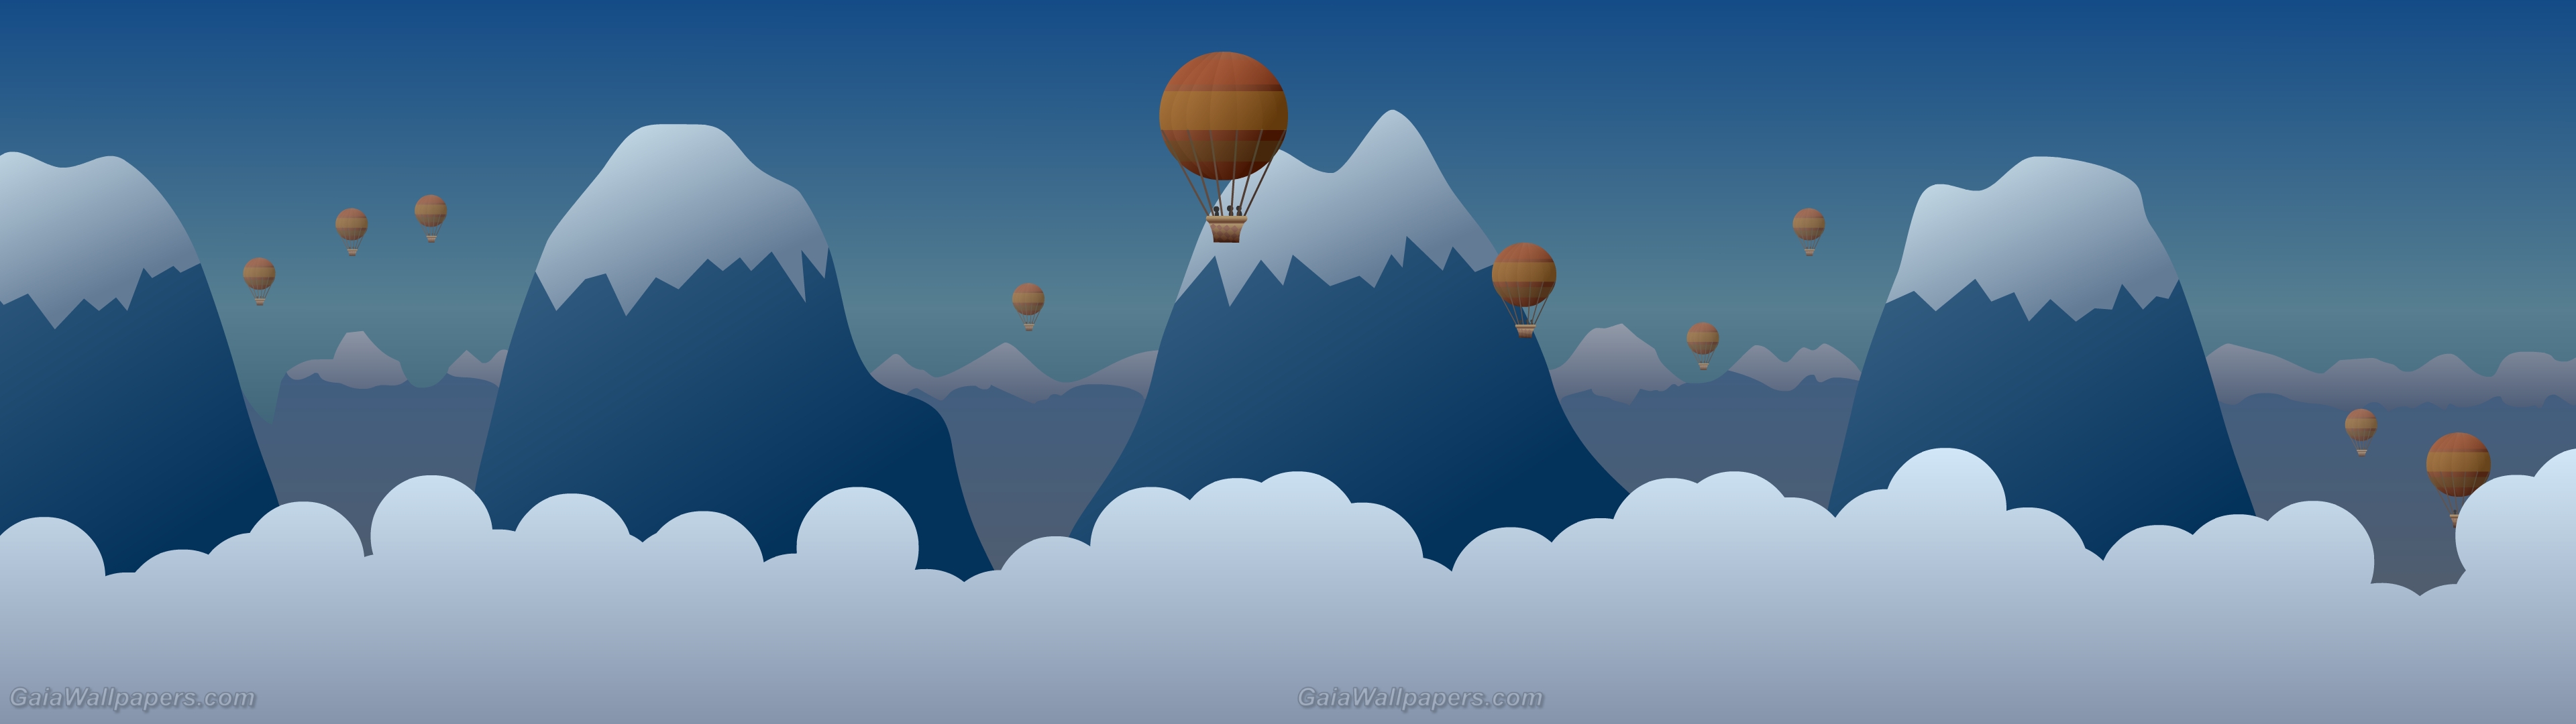 Imaginary Balloon Trip In The Mountains - Hot Air Balloon , HD Wallpaper & Backgrounds